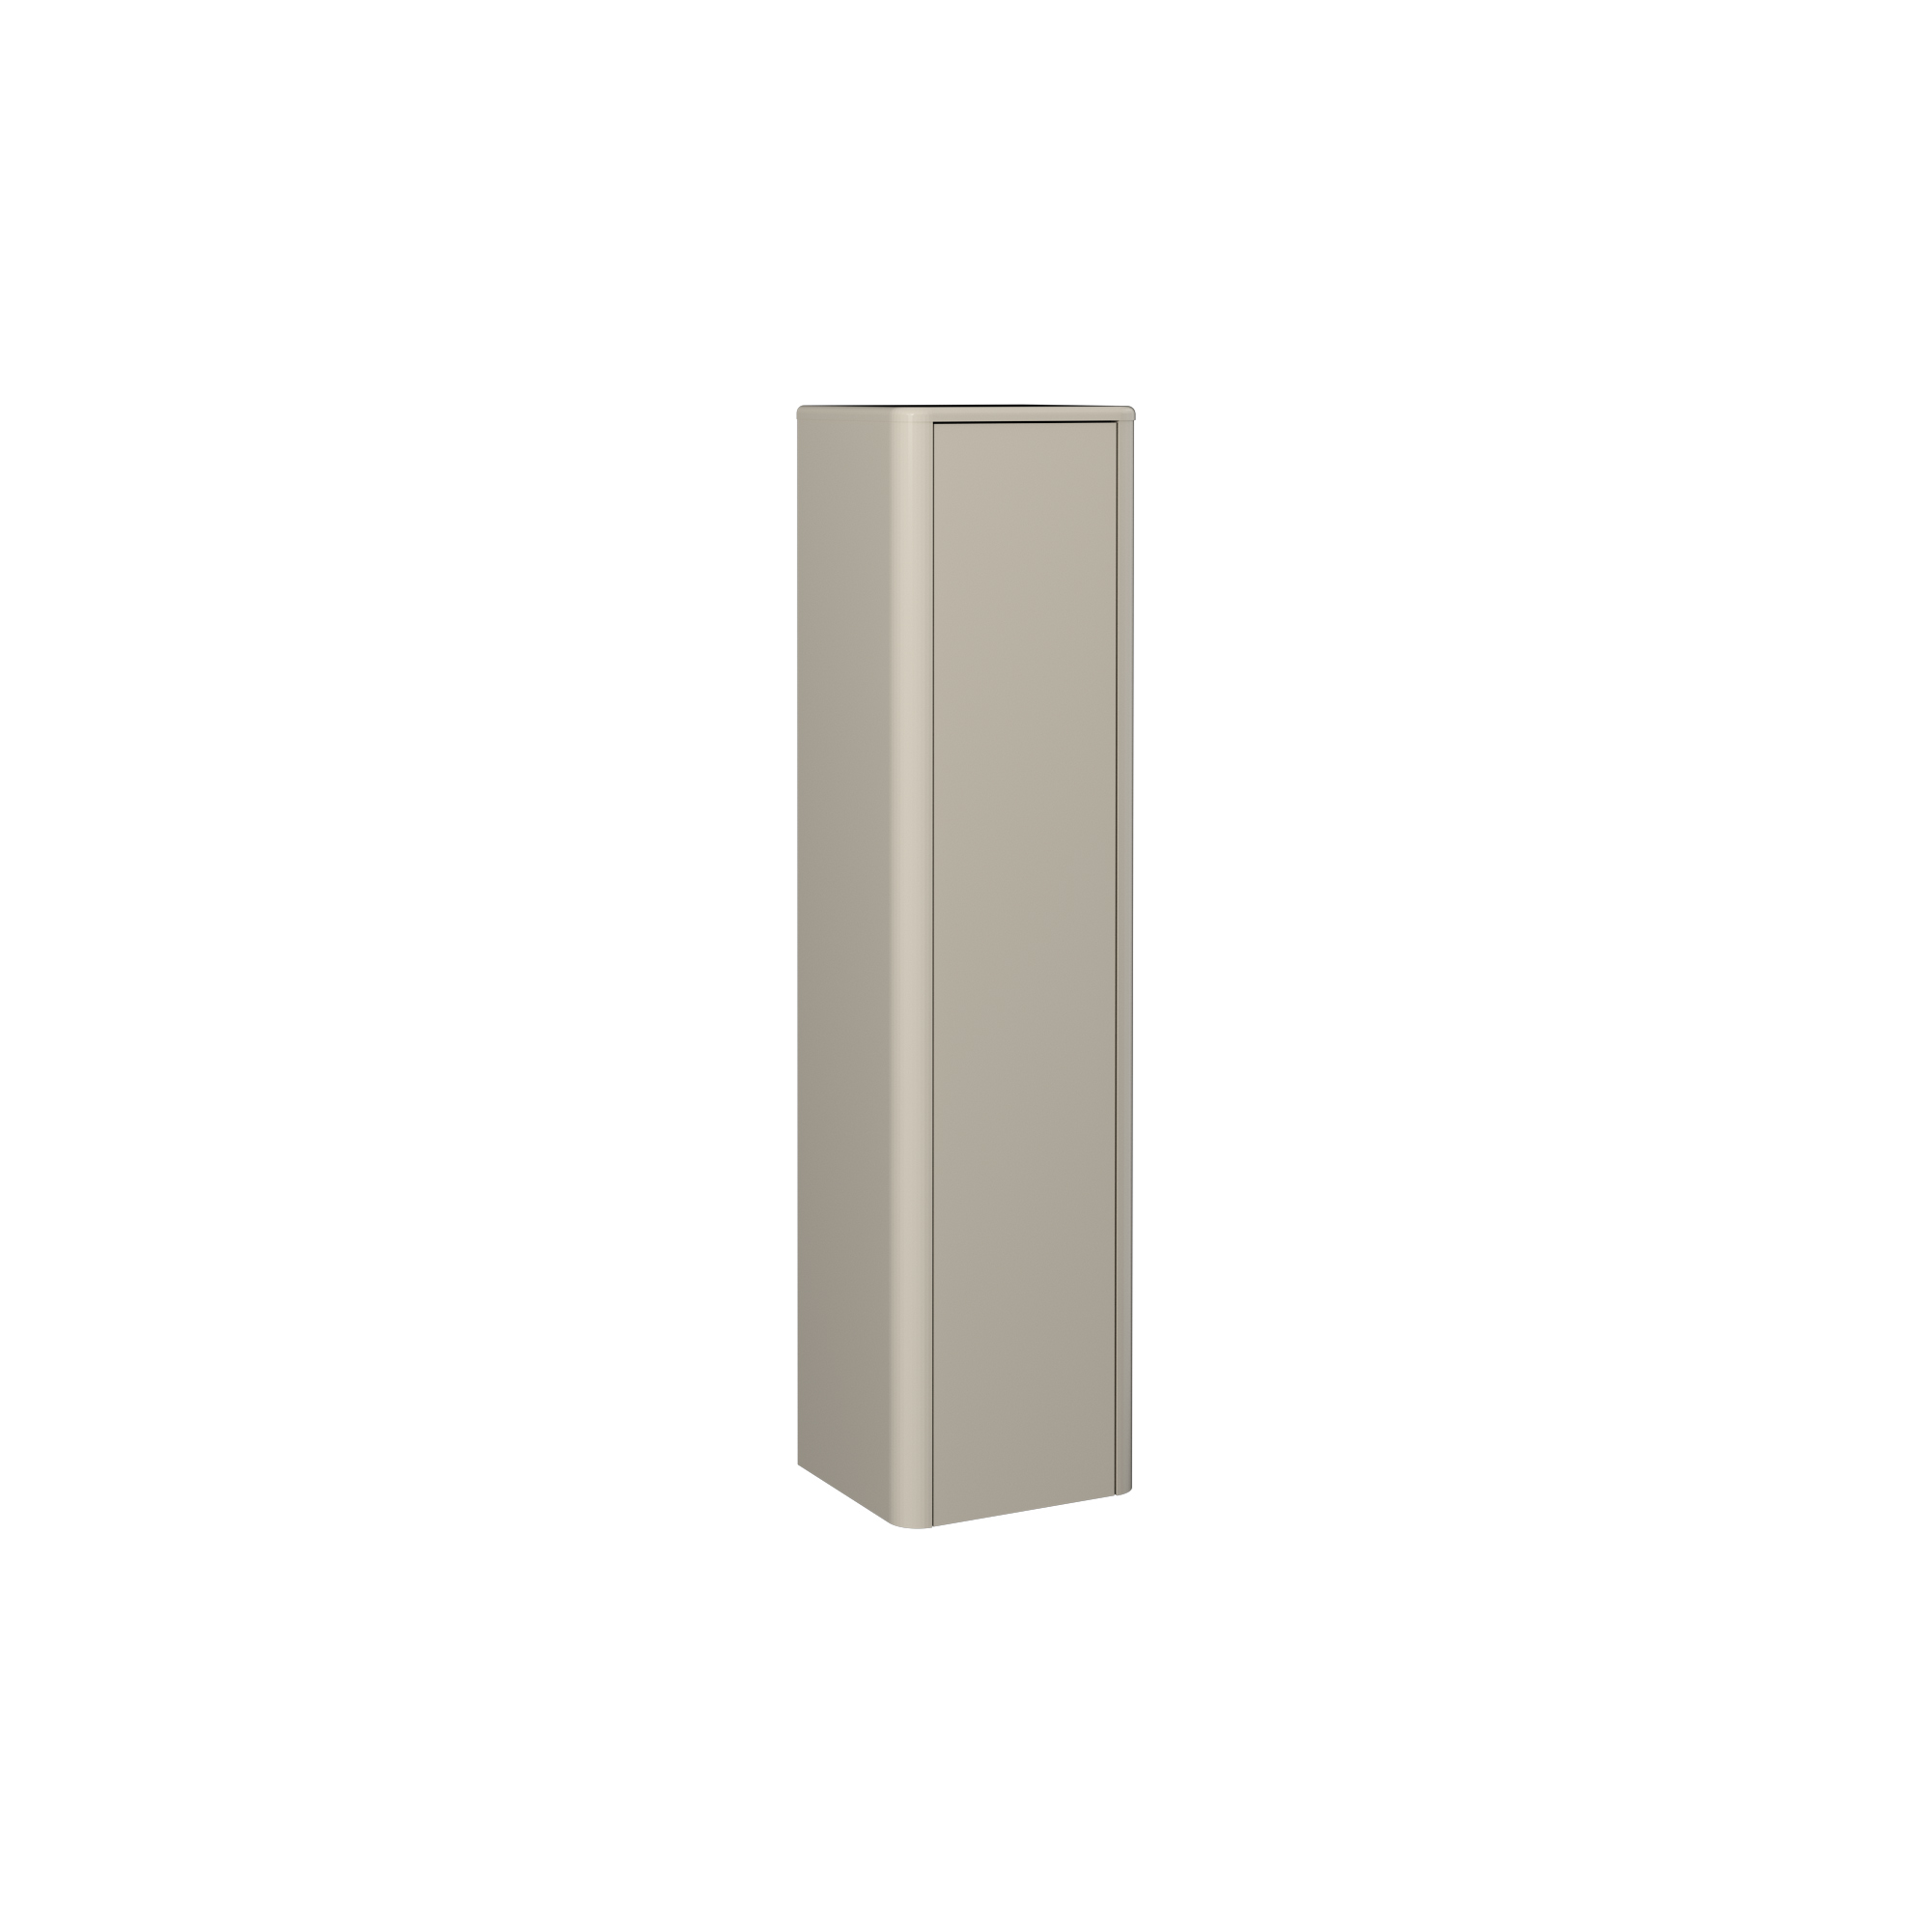 Sogno 16" Tall Cabinet, Sand Beige Right 